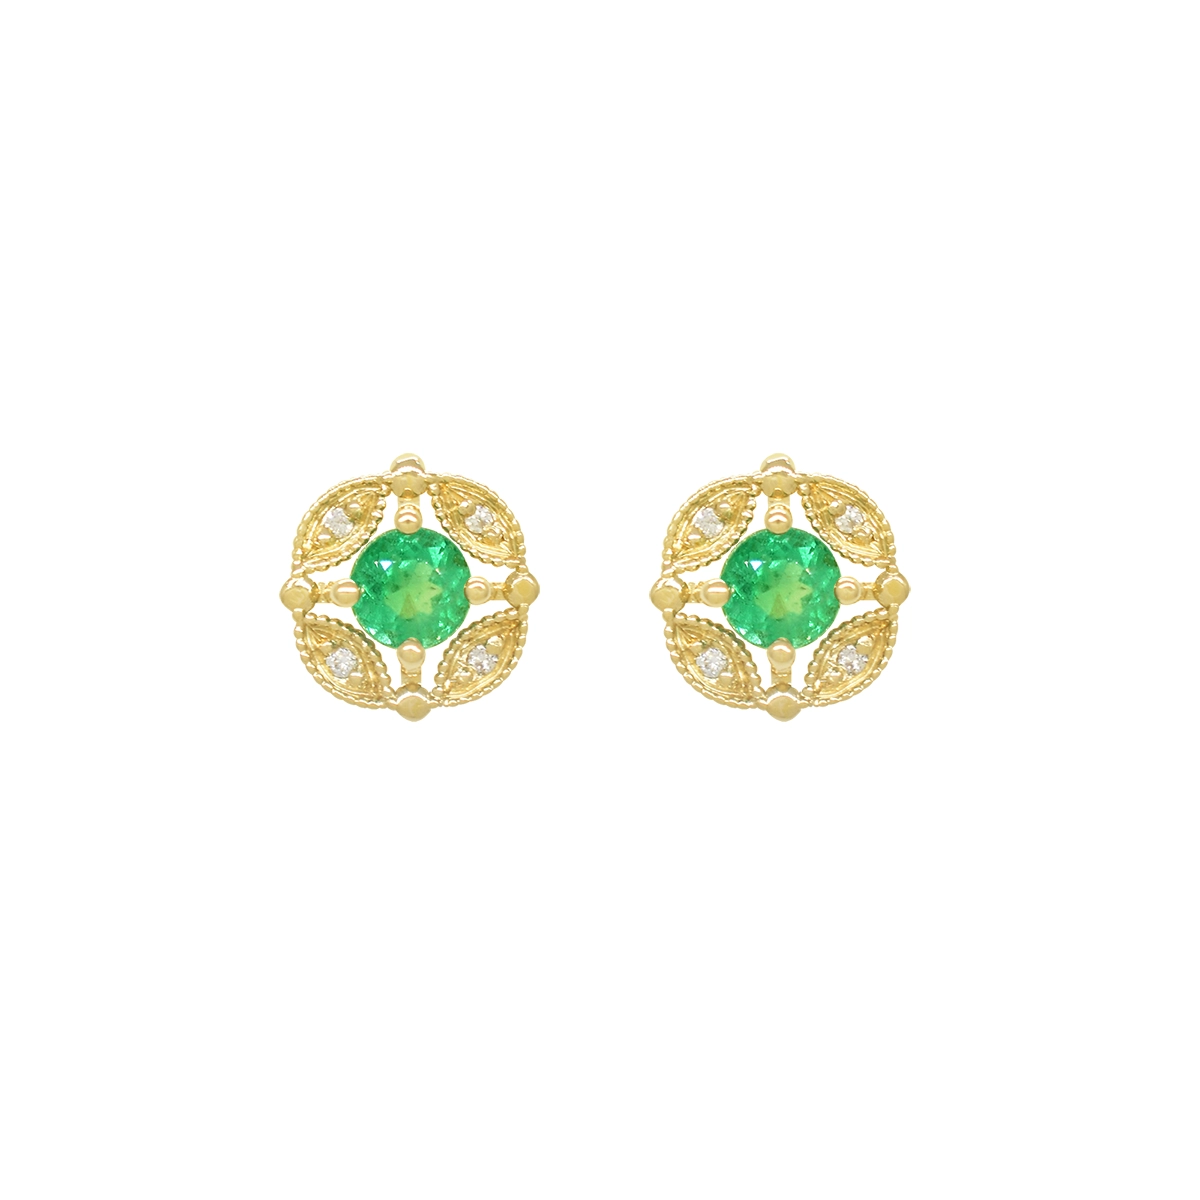 Emerald and diamond stud earrings in 18K yellow gold with two stunning round-cut natural Colombian emeralds weighing 0.36 carats in total and 8 round-cut diamonds weighing 0.04 carats